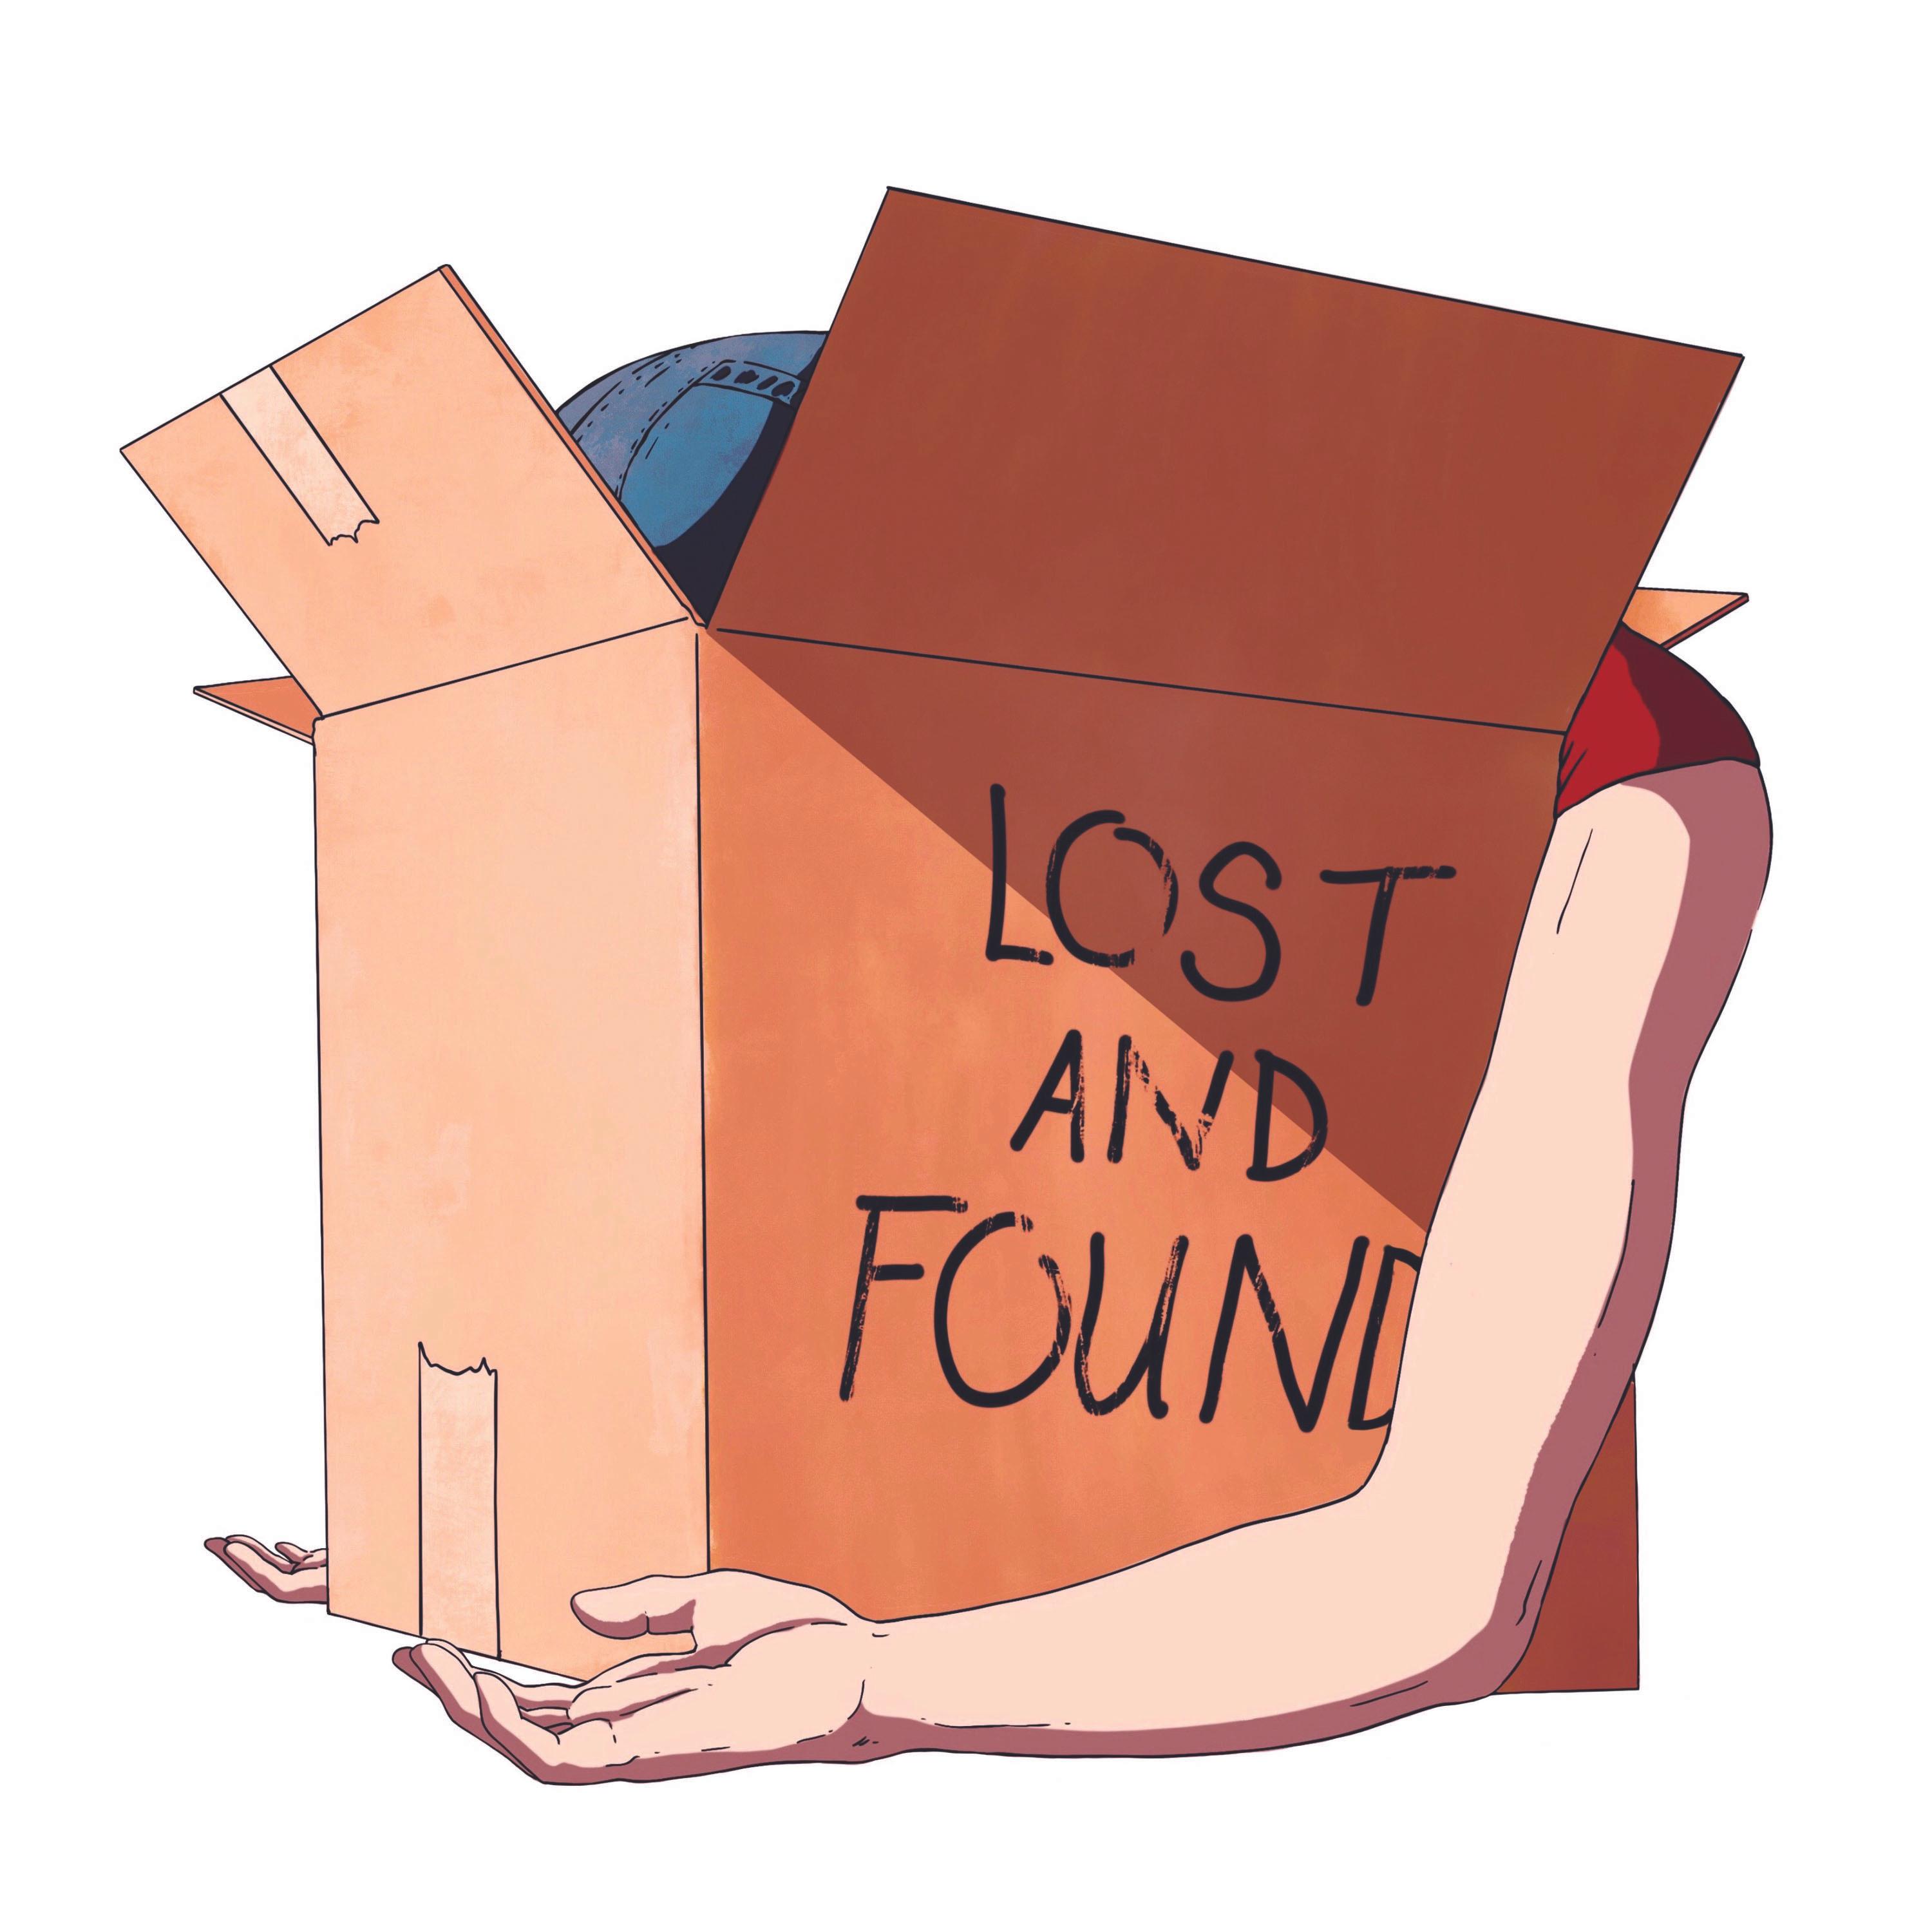 Thumbnail for "243 - Lost and Found".